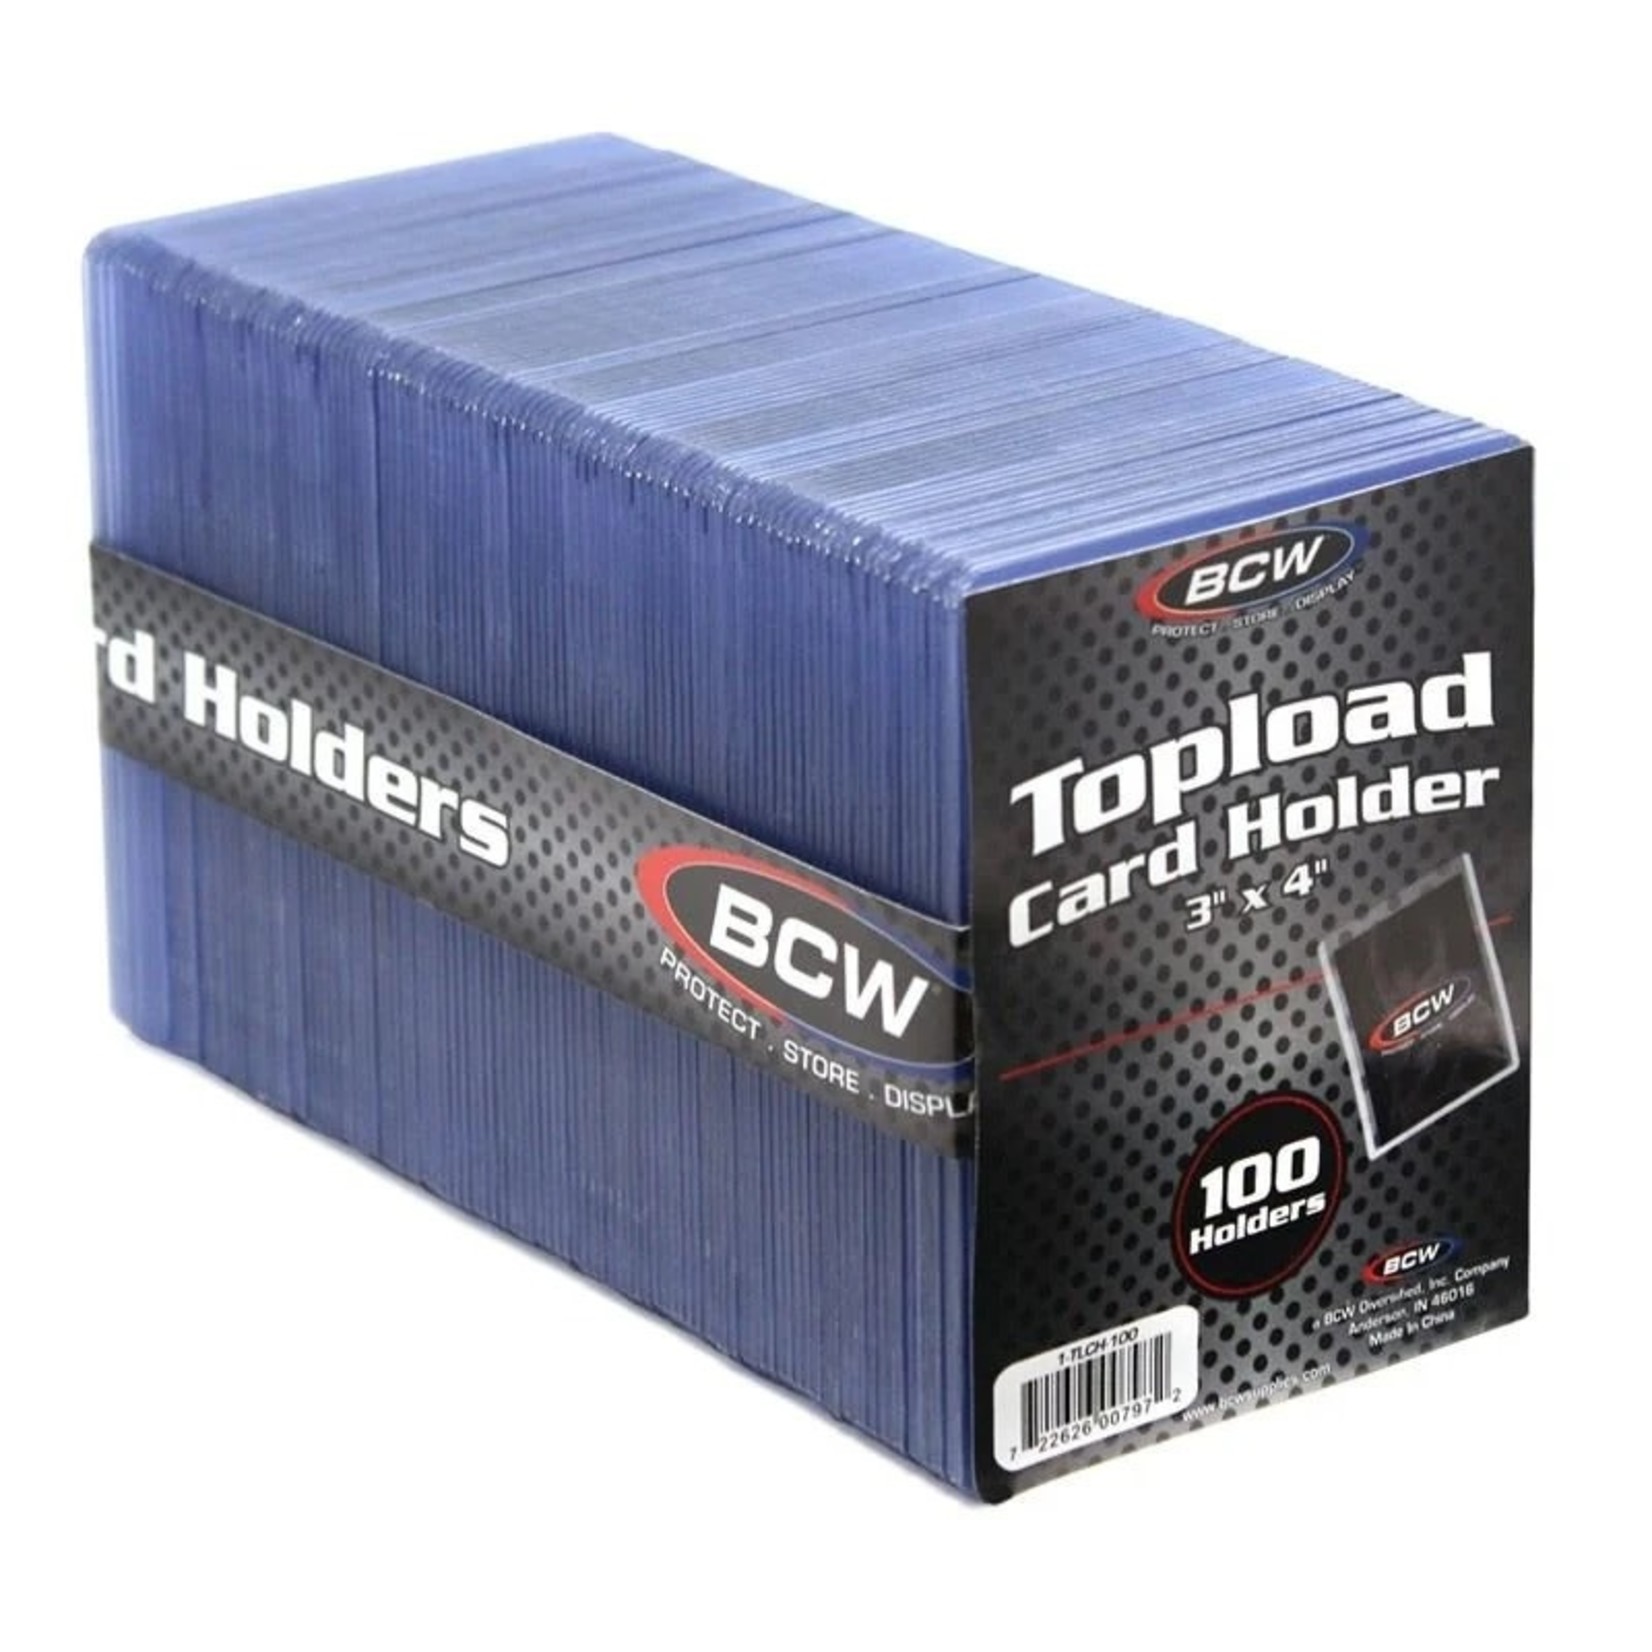 BCW Topload Card Holder 3x4 100ct